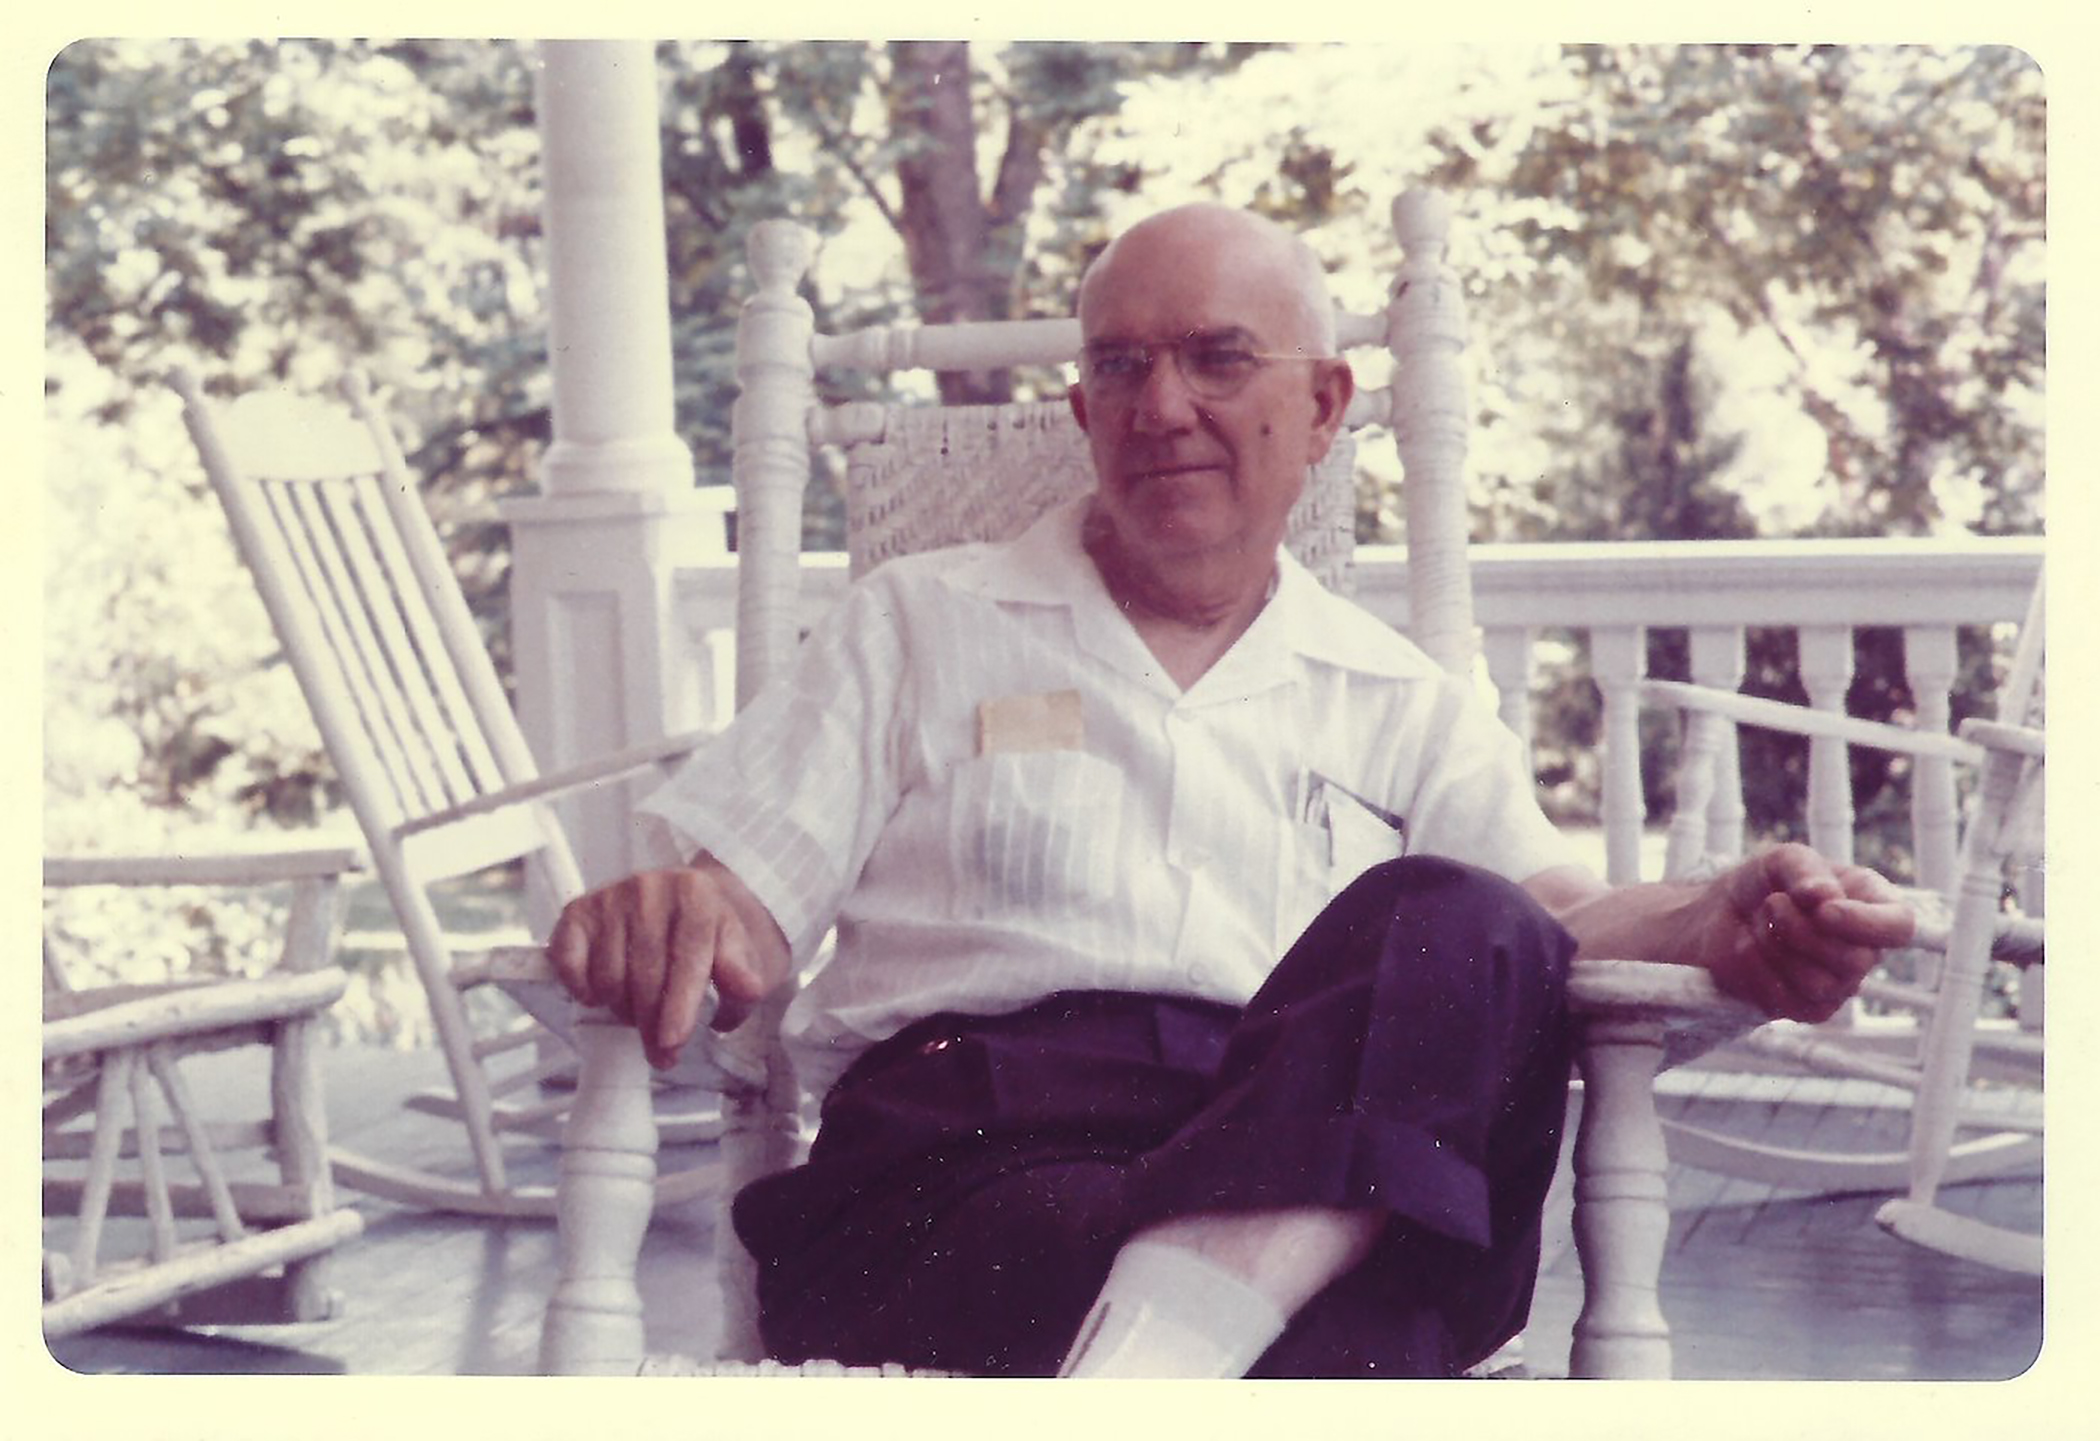 Louis Cline relaxes at Andalusia. Photo credit: Andalusia: The home of Flannery O'Connor. A gift of Louise Florencourt. 2019.1.249